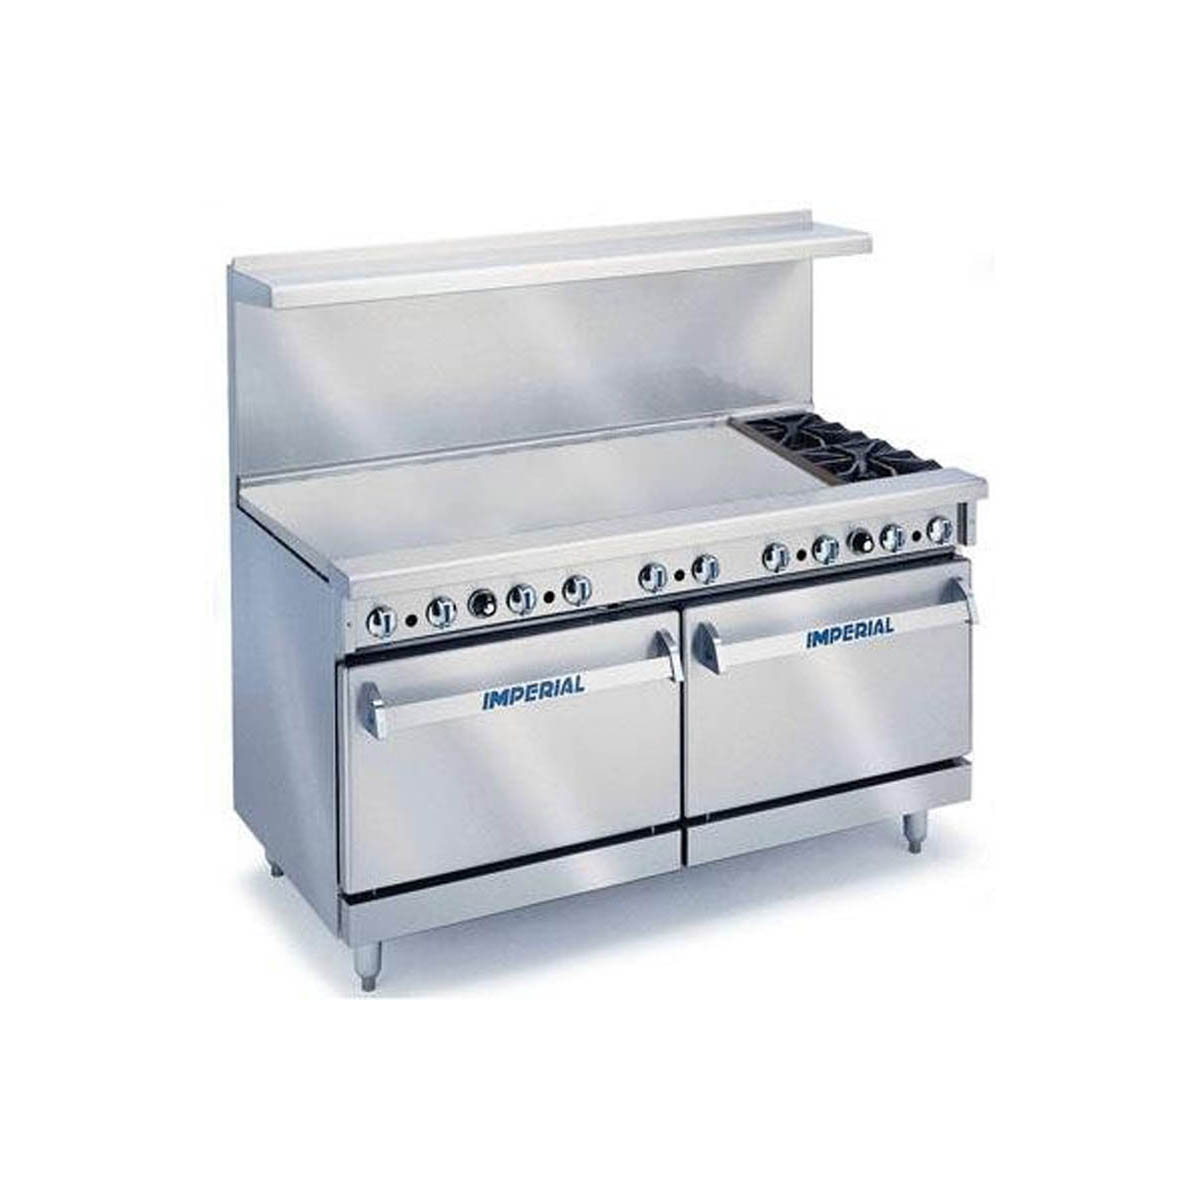 Imperial IR-2-G48-C 60“ Gas Restaurant Range w/ 2 Open Burners, 48“ Griddle, Standard Oven, Convection Oven